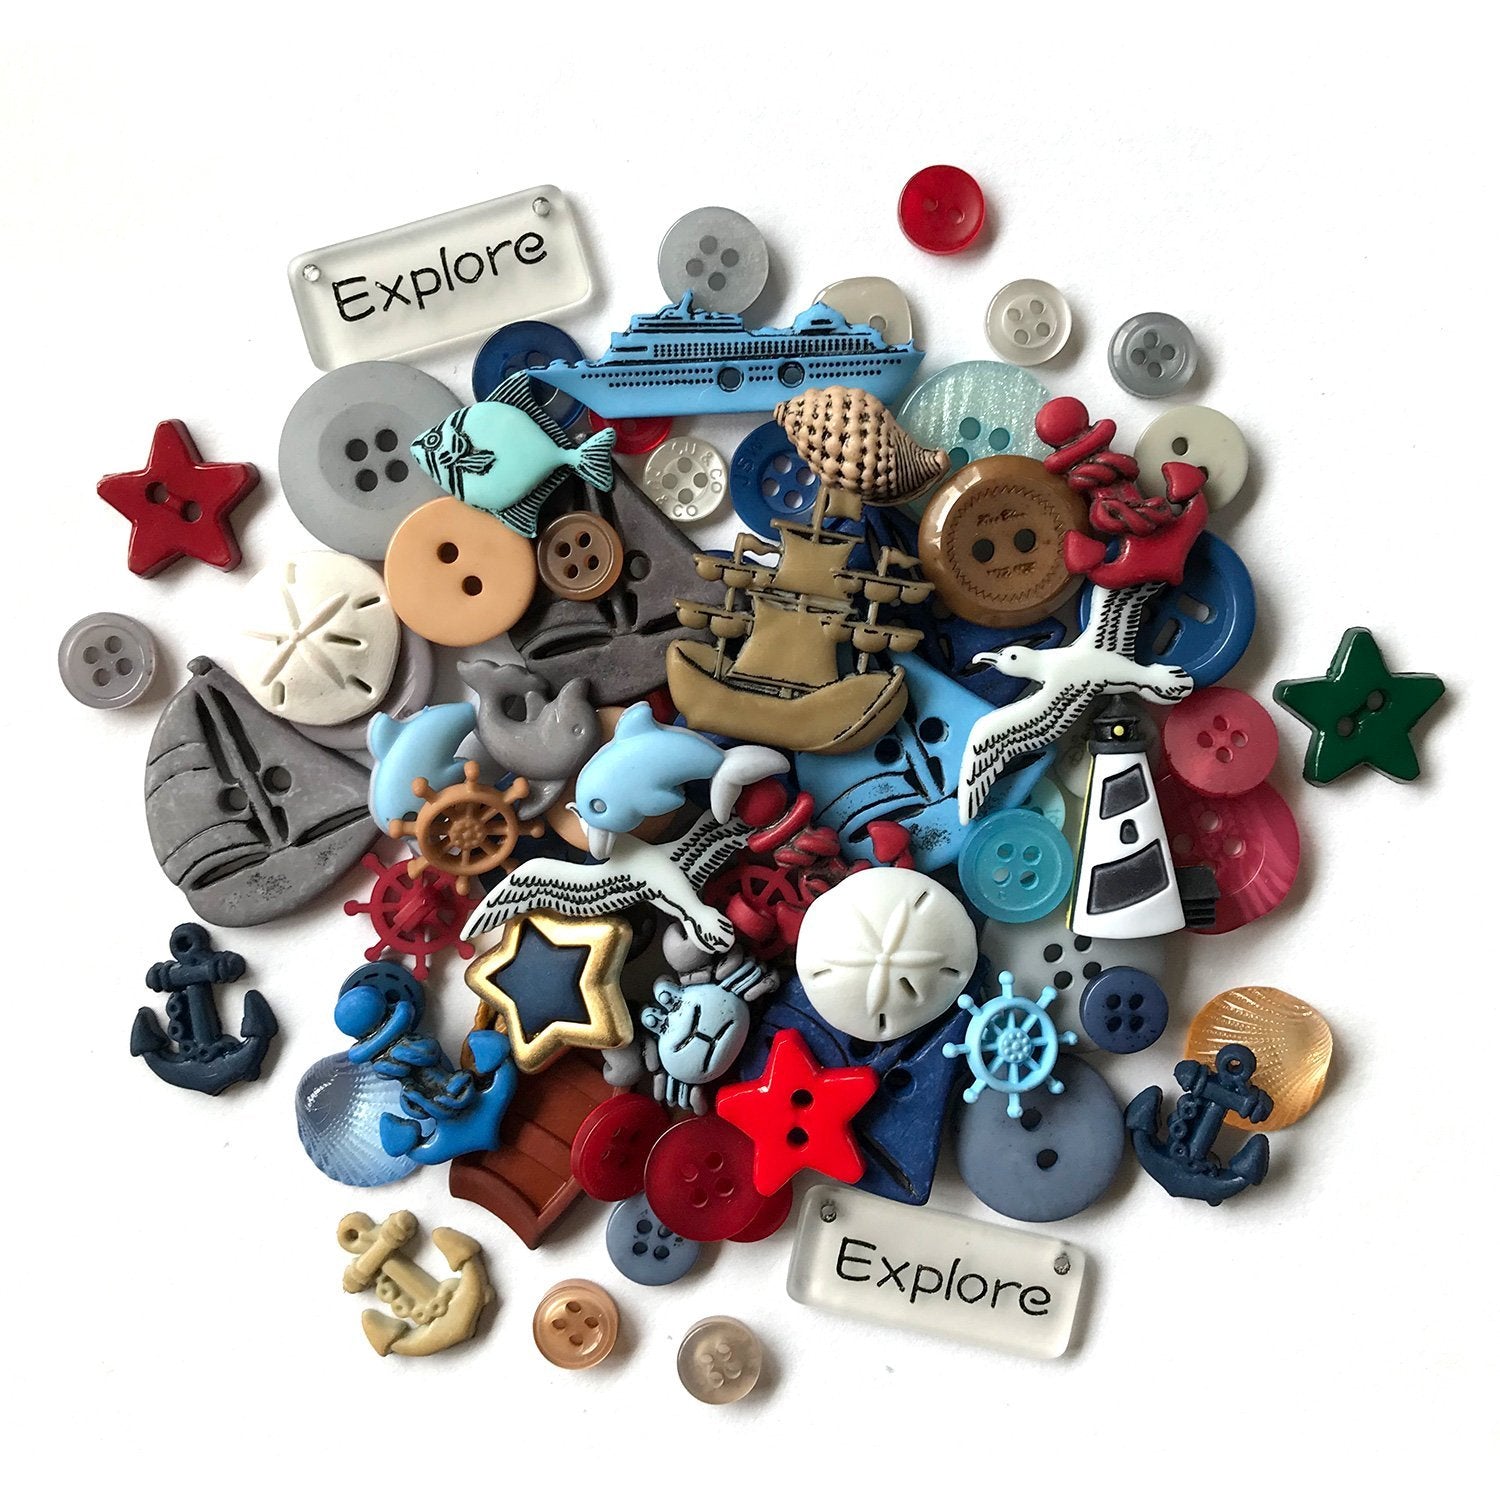 Buttons Galore Craft & Sewing Buttons - Stars - 60 Buttons